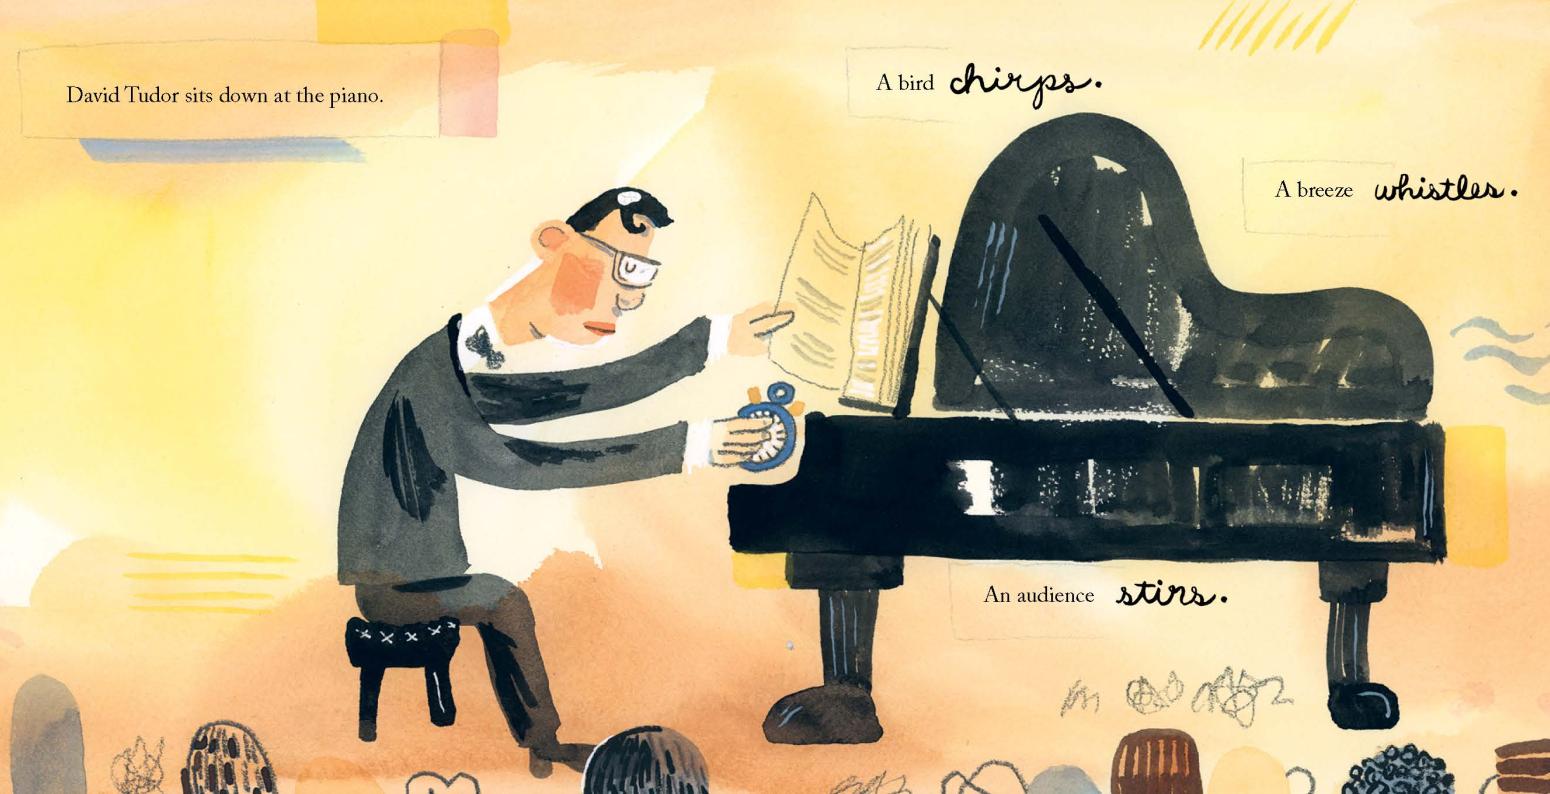 Musican sits at a piano, with hands raised over the keys. In one hand the musician holds a stopwatch.